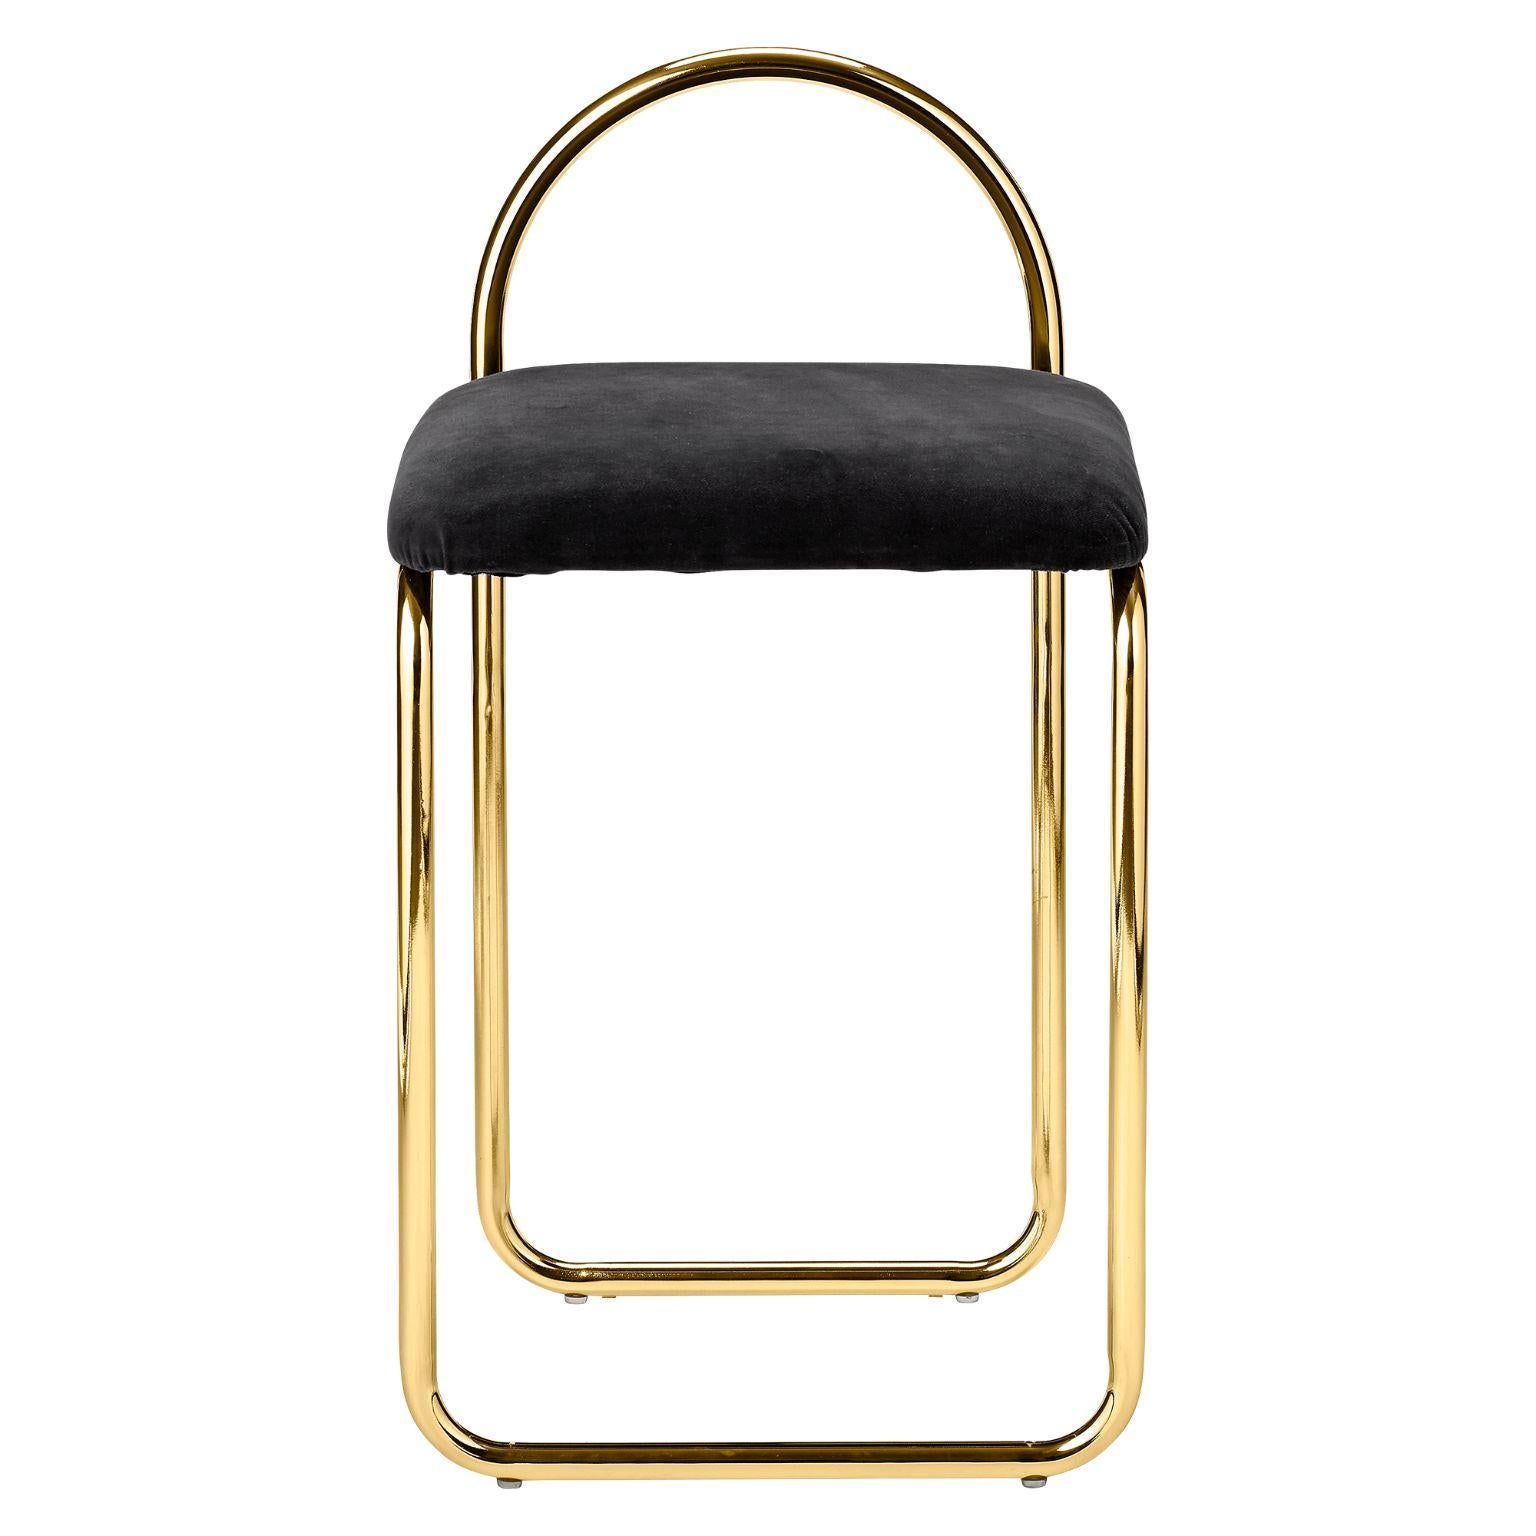 Anthracite velvet and gold Minimalist dining chair
Dimensions: L 37 x W 39 x H 68 CM
Materials: Velvet, steel

The collection includes benches, chairs, shelves and mirrors in a wide variety of sizes.